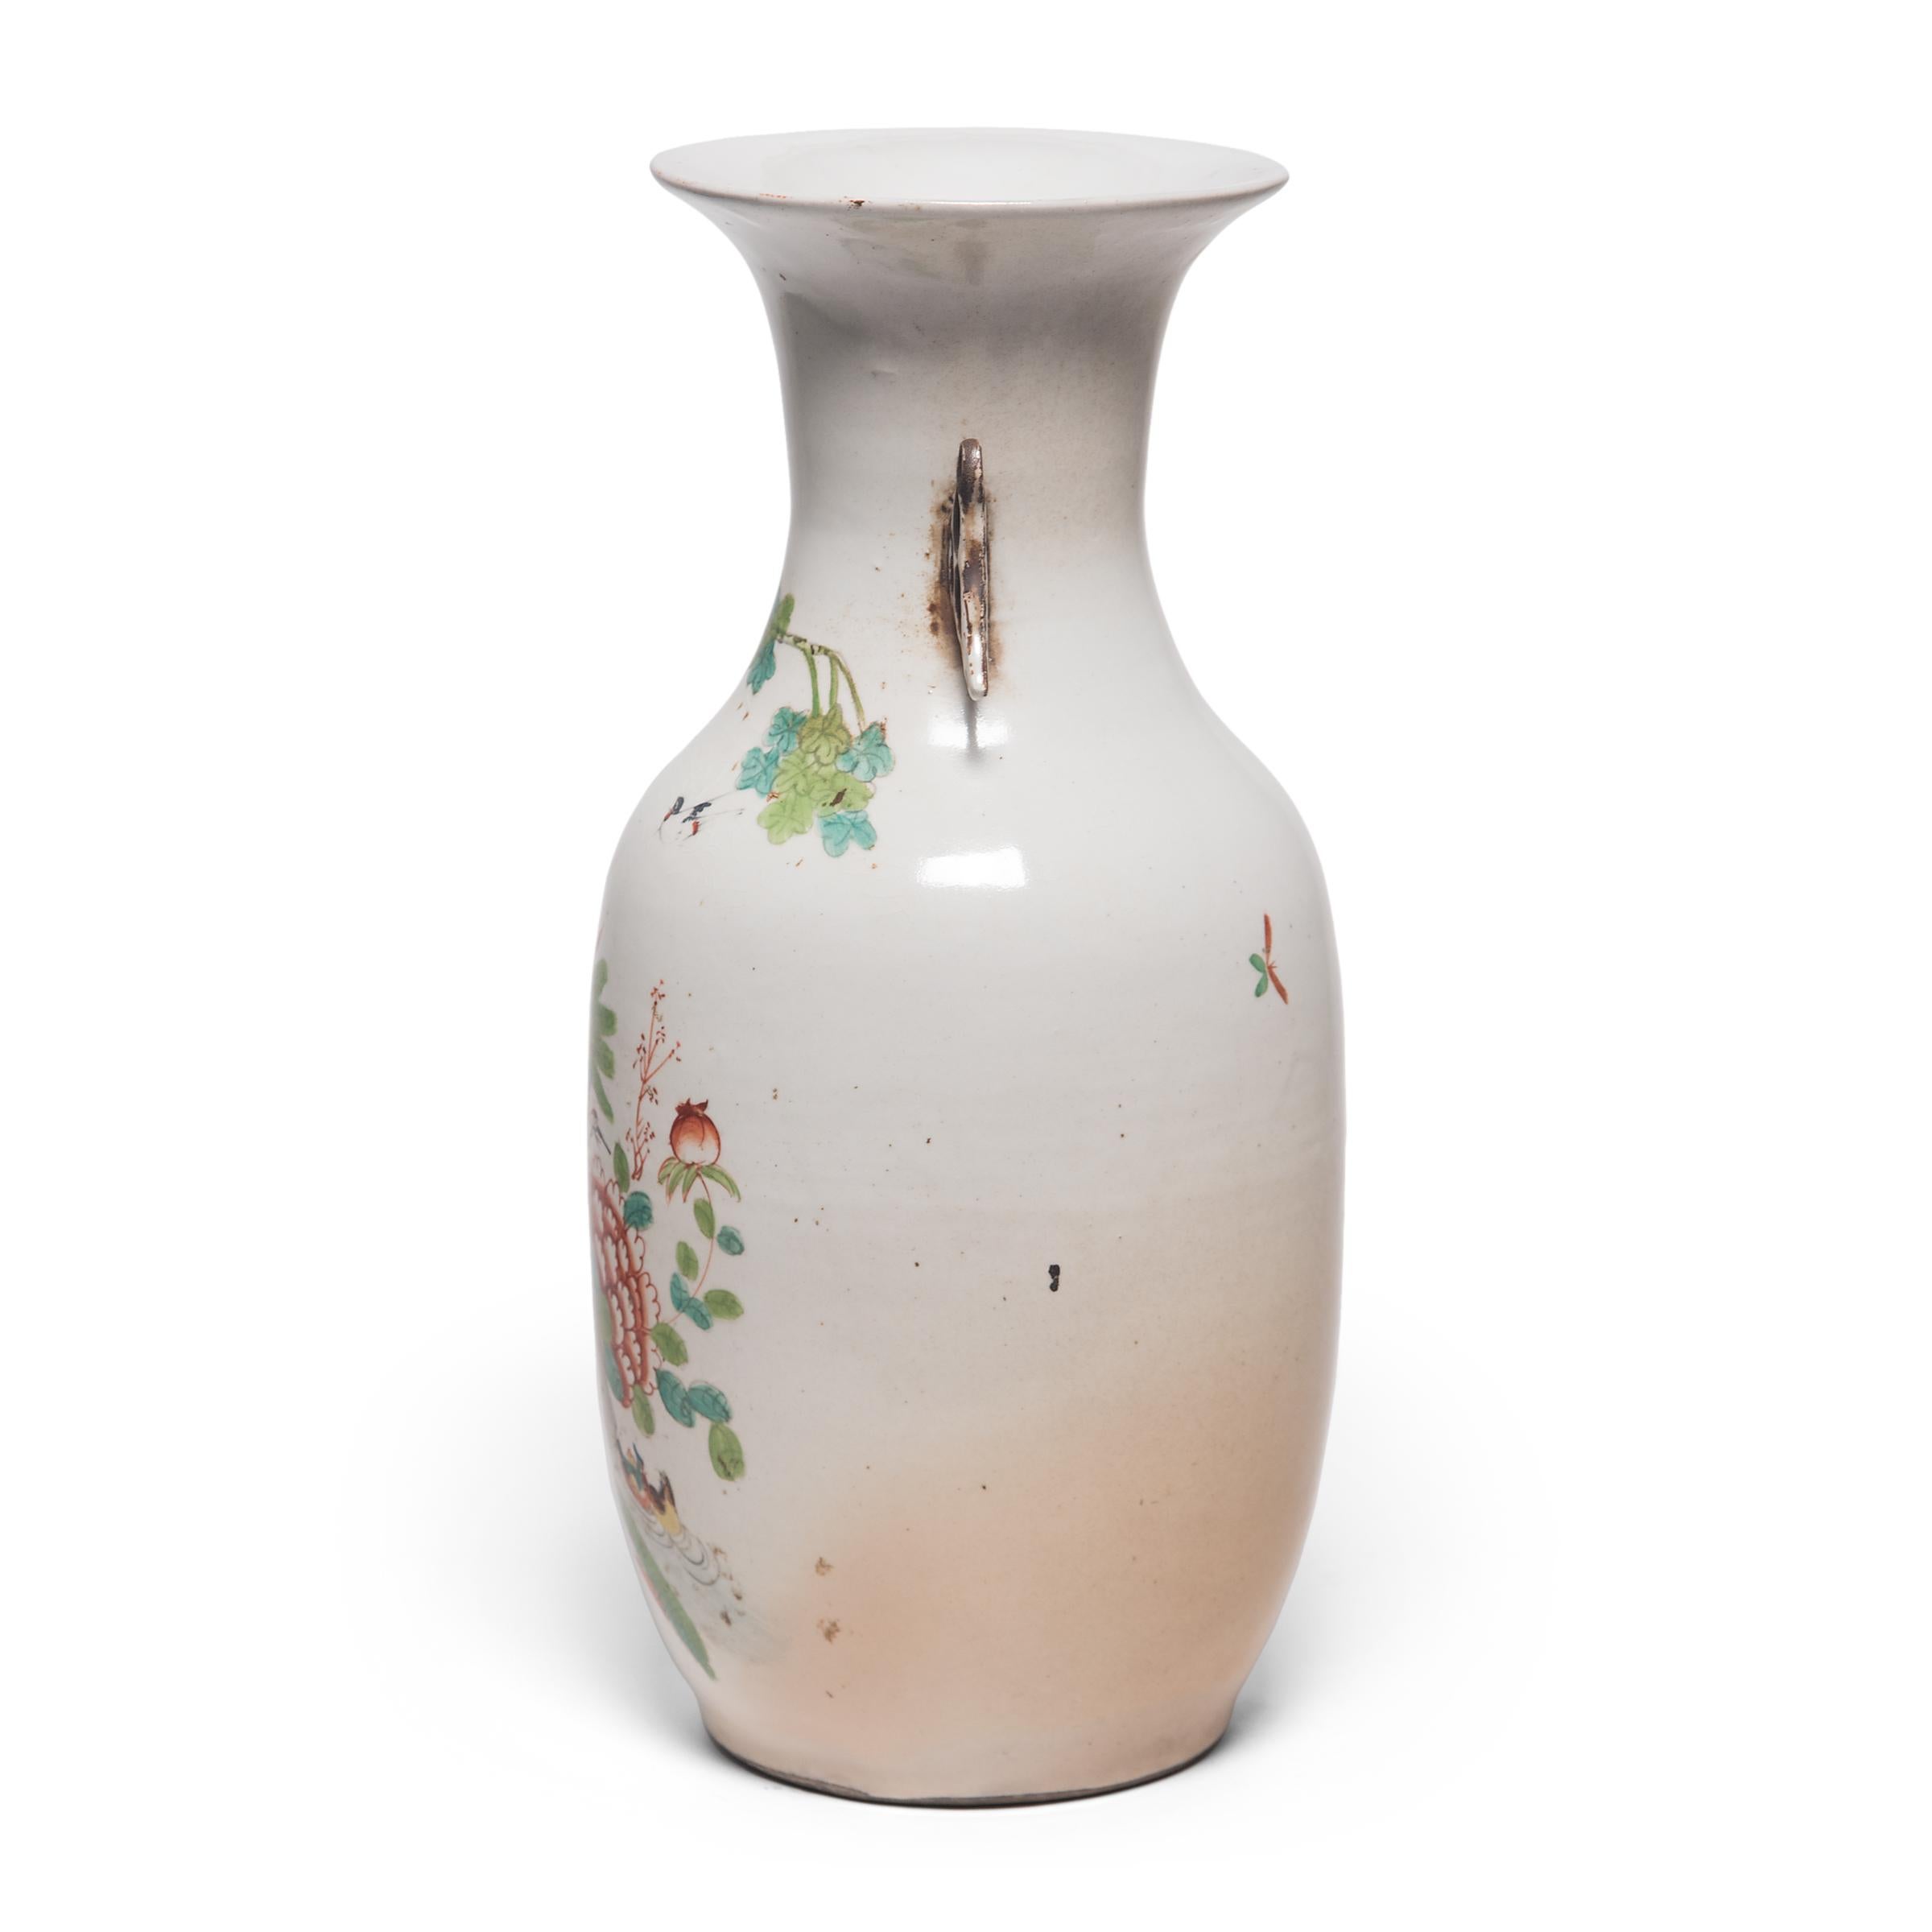 The phoenix tail vase dates from the bronze age and has remained a popular shape for its clean lines and graceful curves. Dating from circa 1900, this vase depicts a peacock in a lovely garden setting. Lavishly detailed and masterfully painted, the